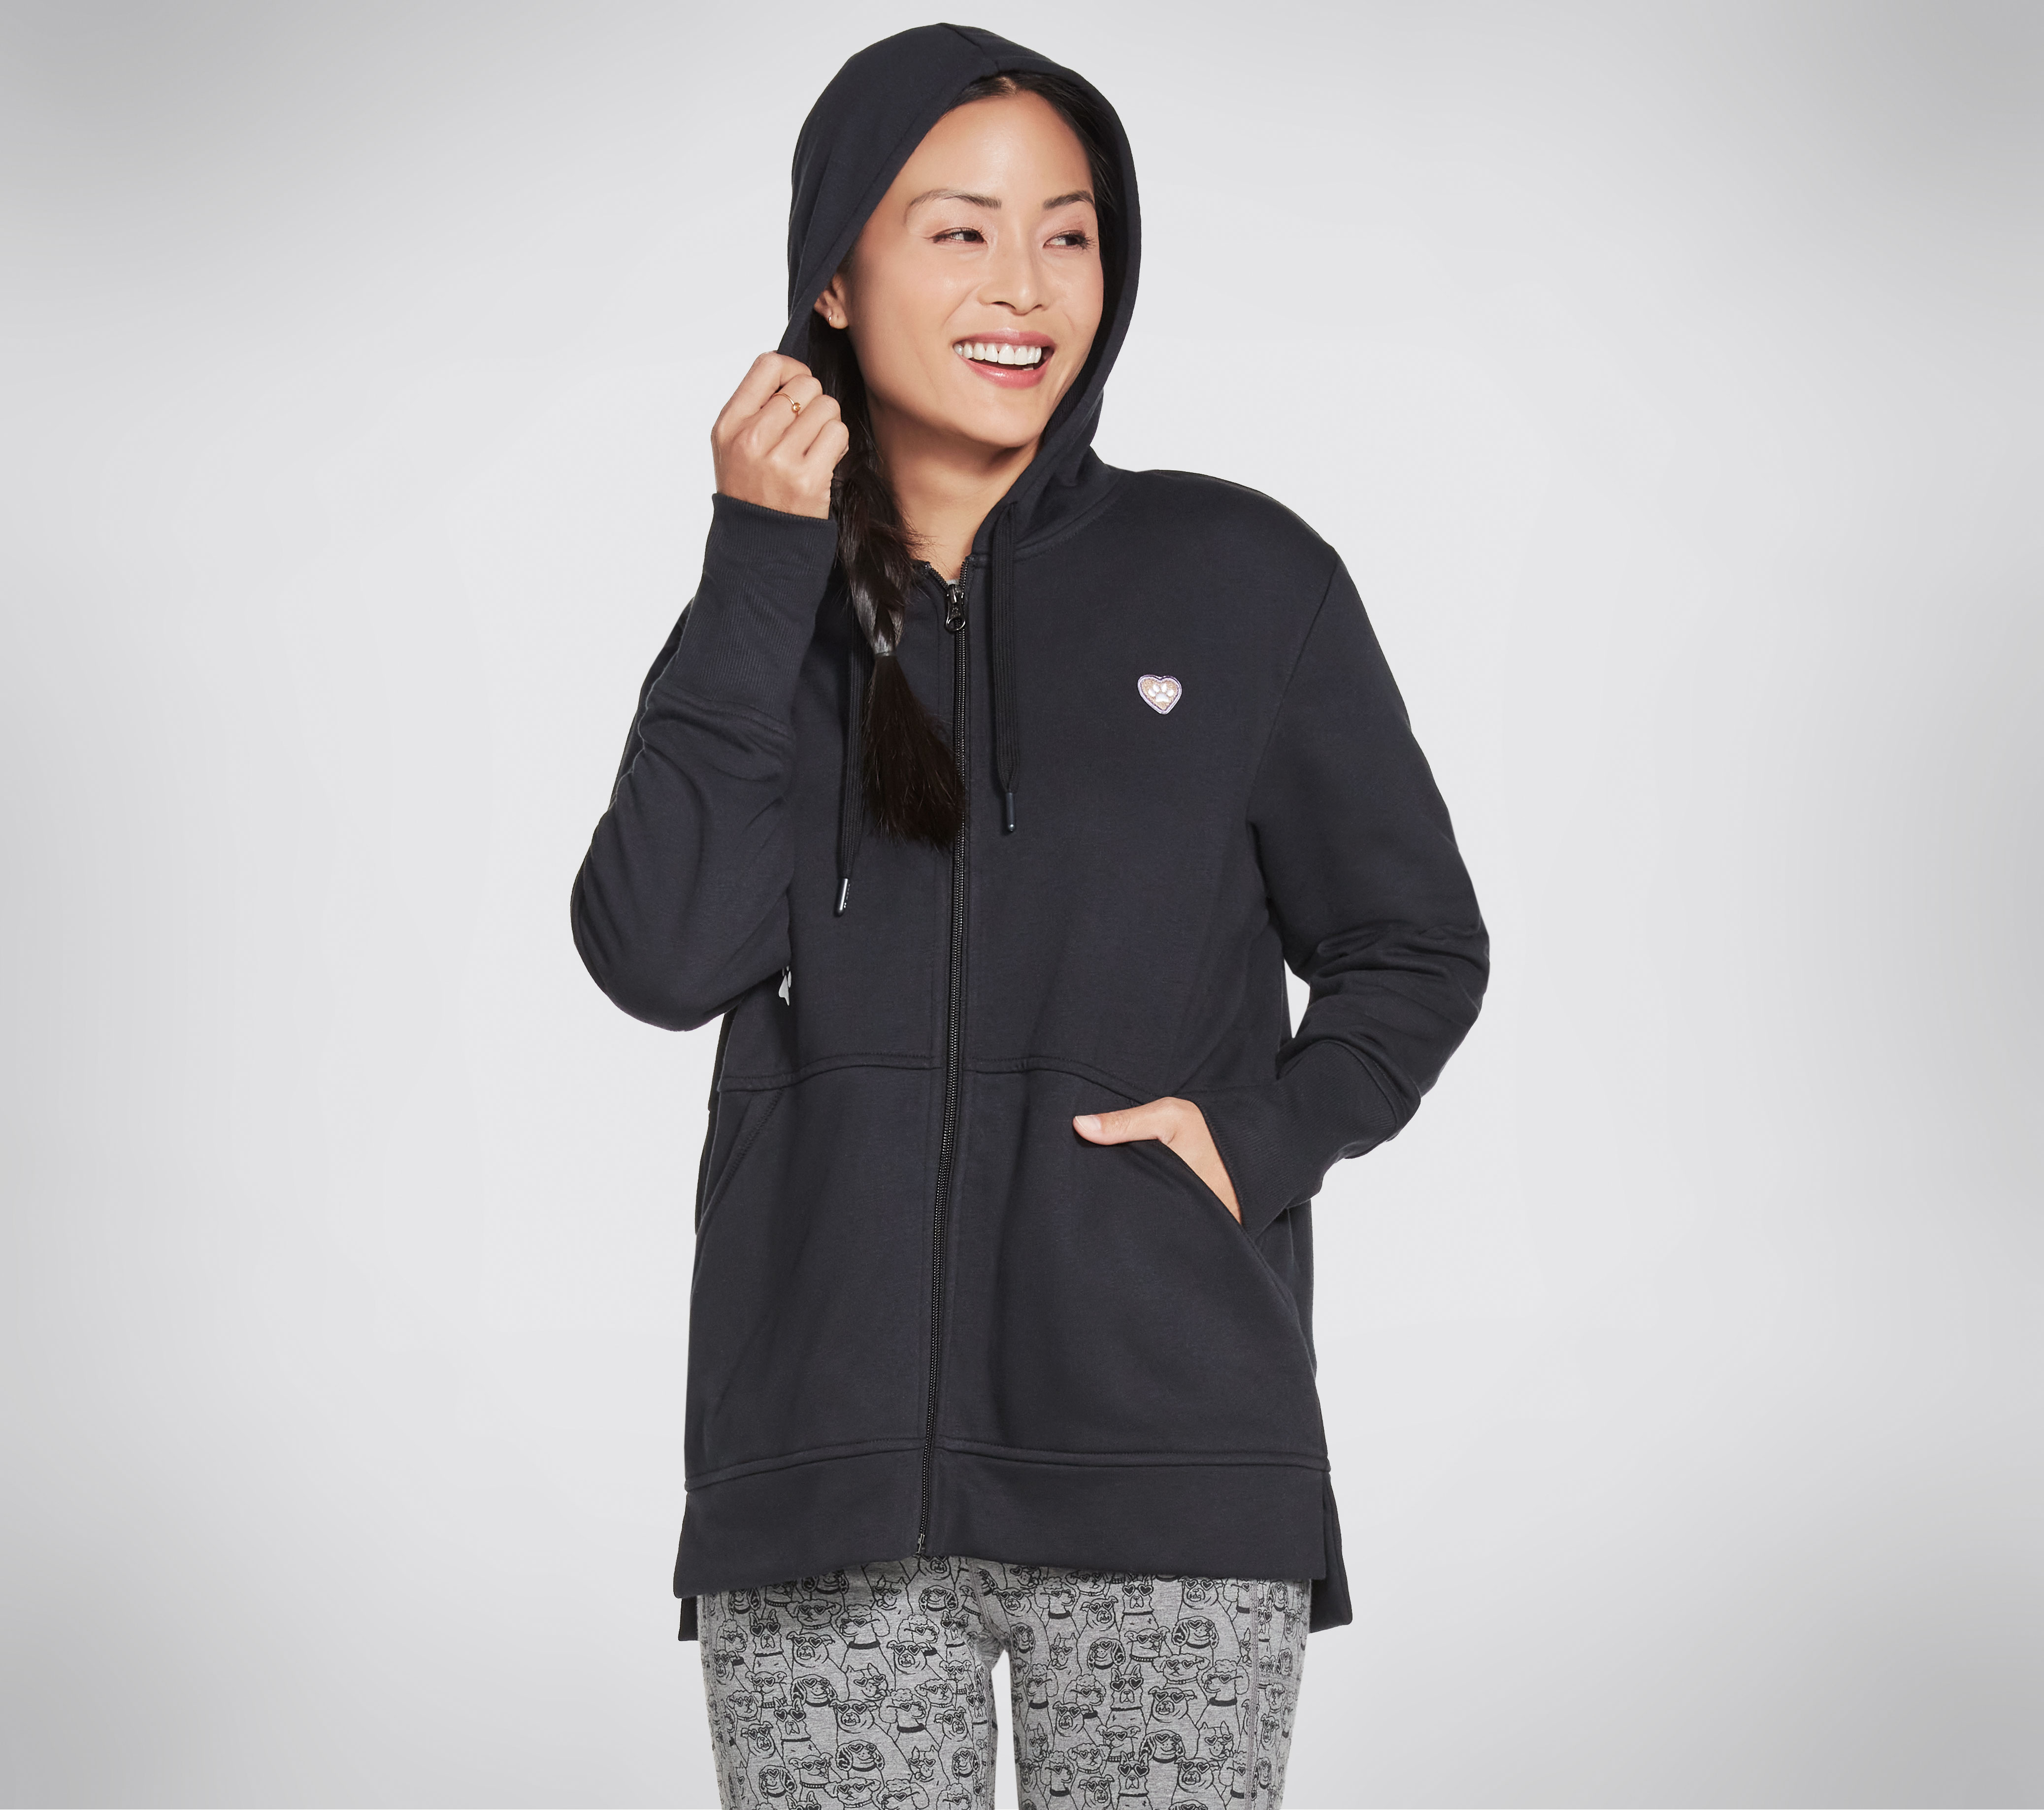 Shop the BOBS Apparel Rescued High Rib Front Zip Hoodie | SKECHERS